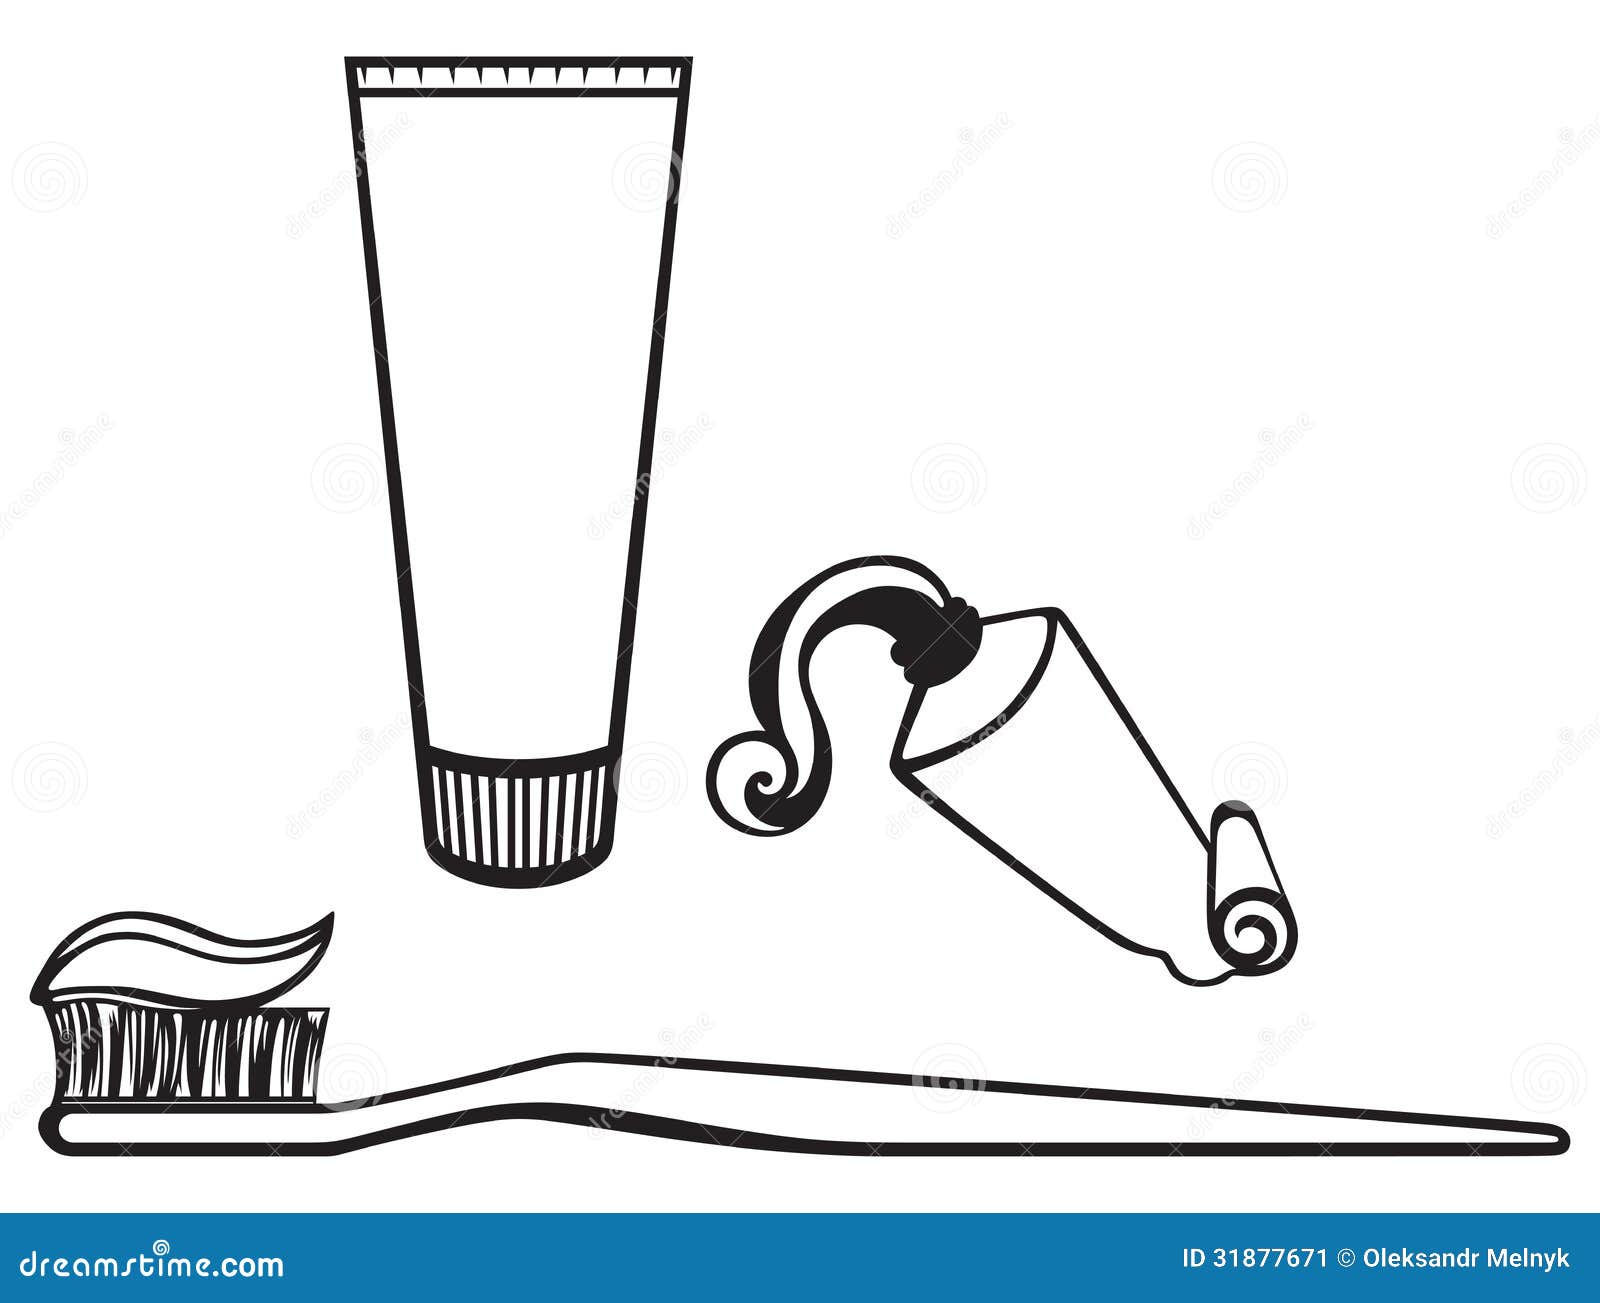 toothpaste clipart black and white - photo #20